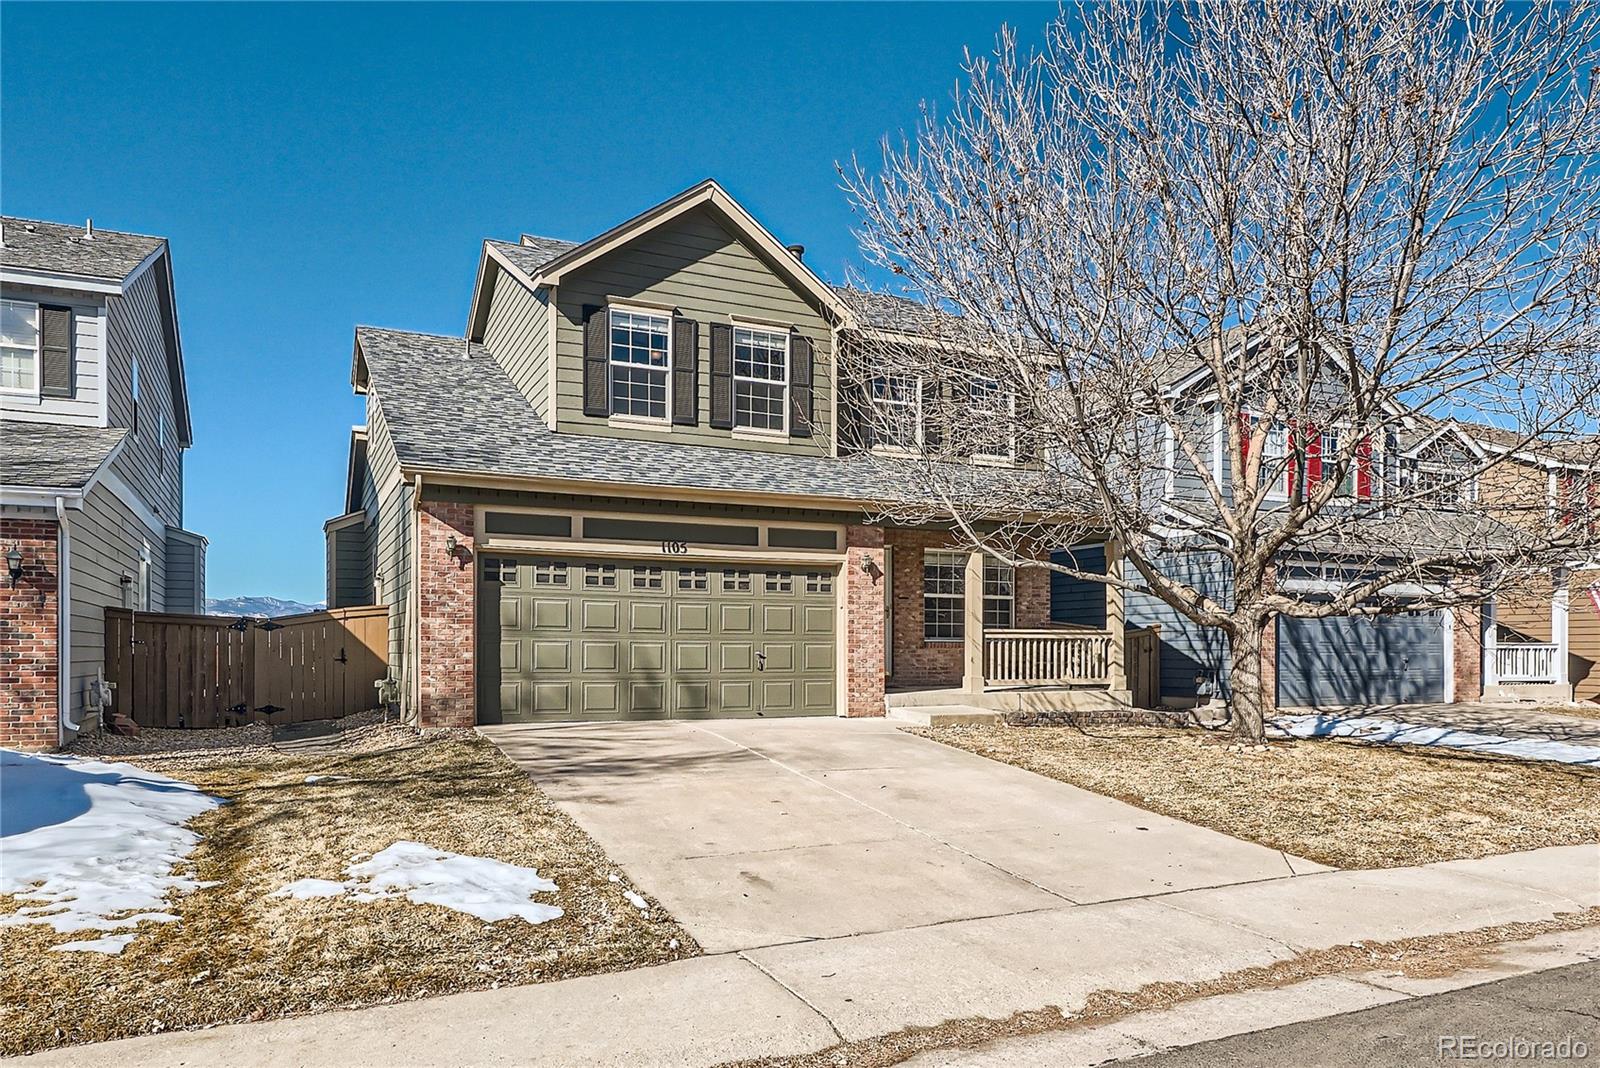 CMA Image for 1105  mulberry lane,Highlands Ranch, Colorado